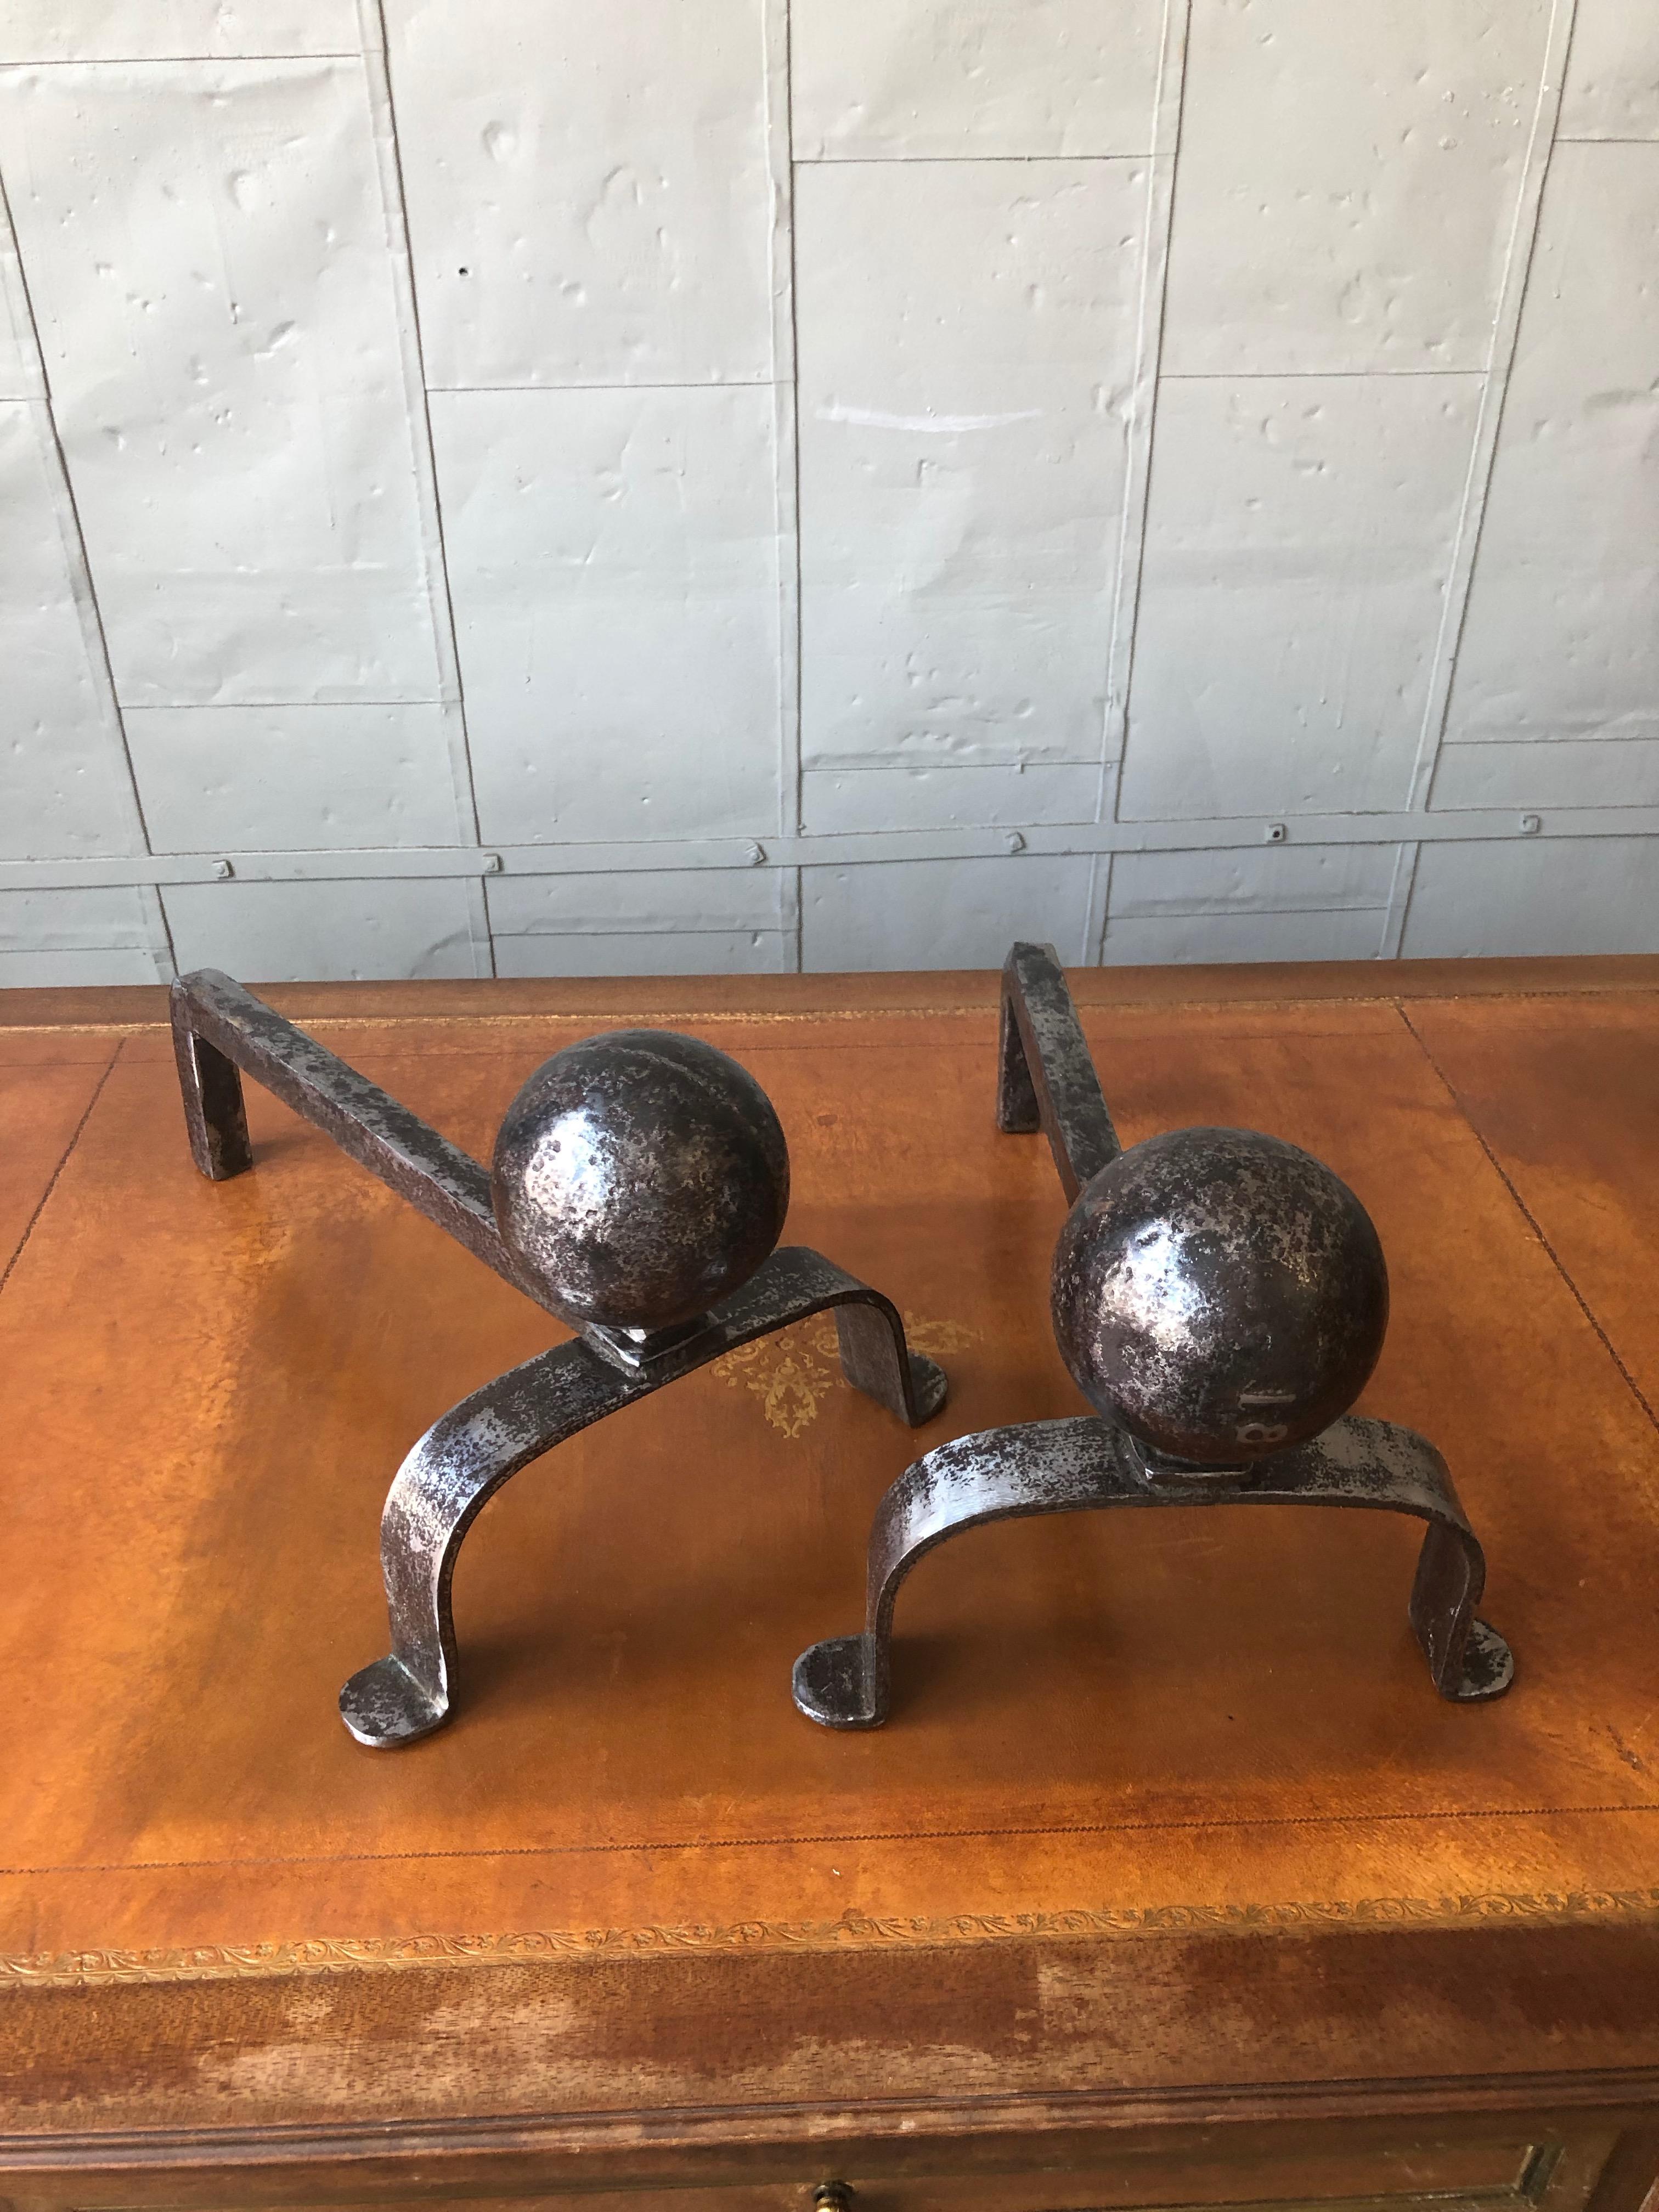 An interesting pair of Art Deco style andirons made of polished iron with oversized decorative cast iron balls mounted on a base with cabriolet feet. French, 1920s.

Ref #: D0819-02

Dimensions: 9“H x 10¼”W x 16”D